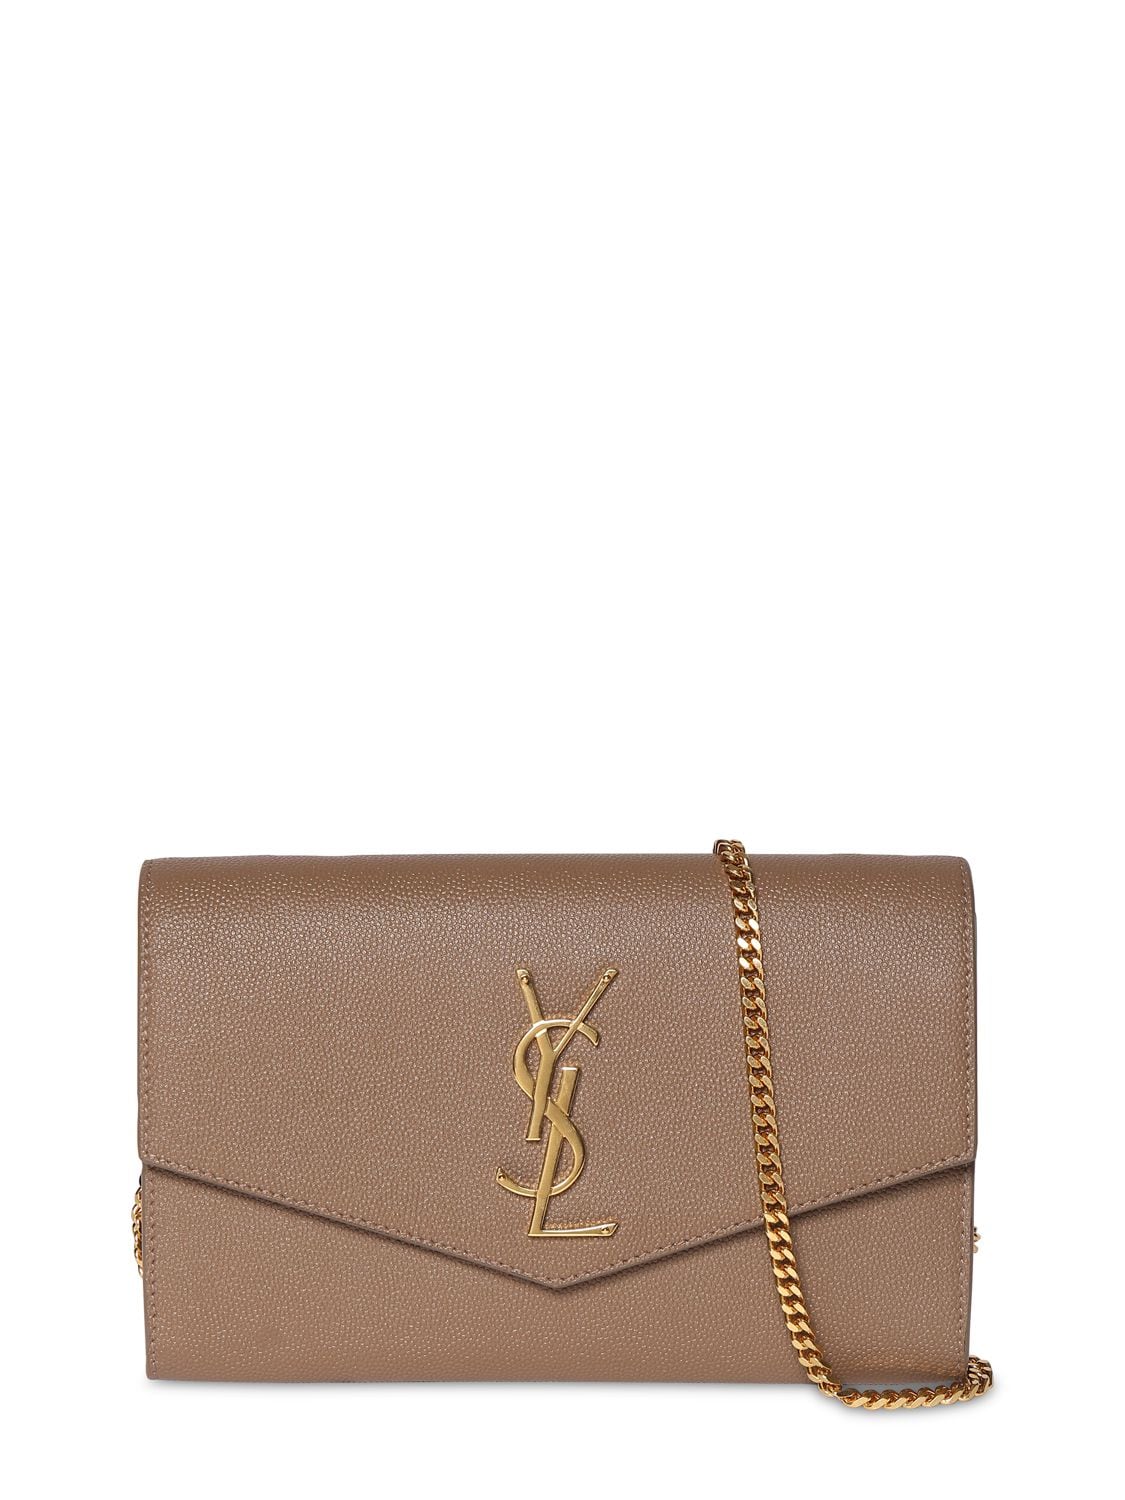 Yves Saint Laurent White Grained Leather Metalasse Wallet on Chain Bag -  Yoogi's Closet